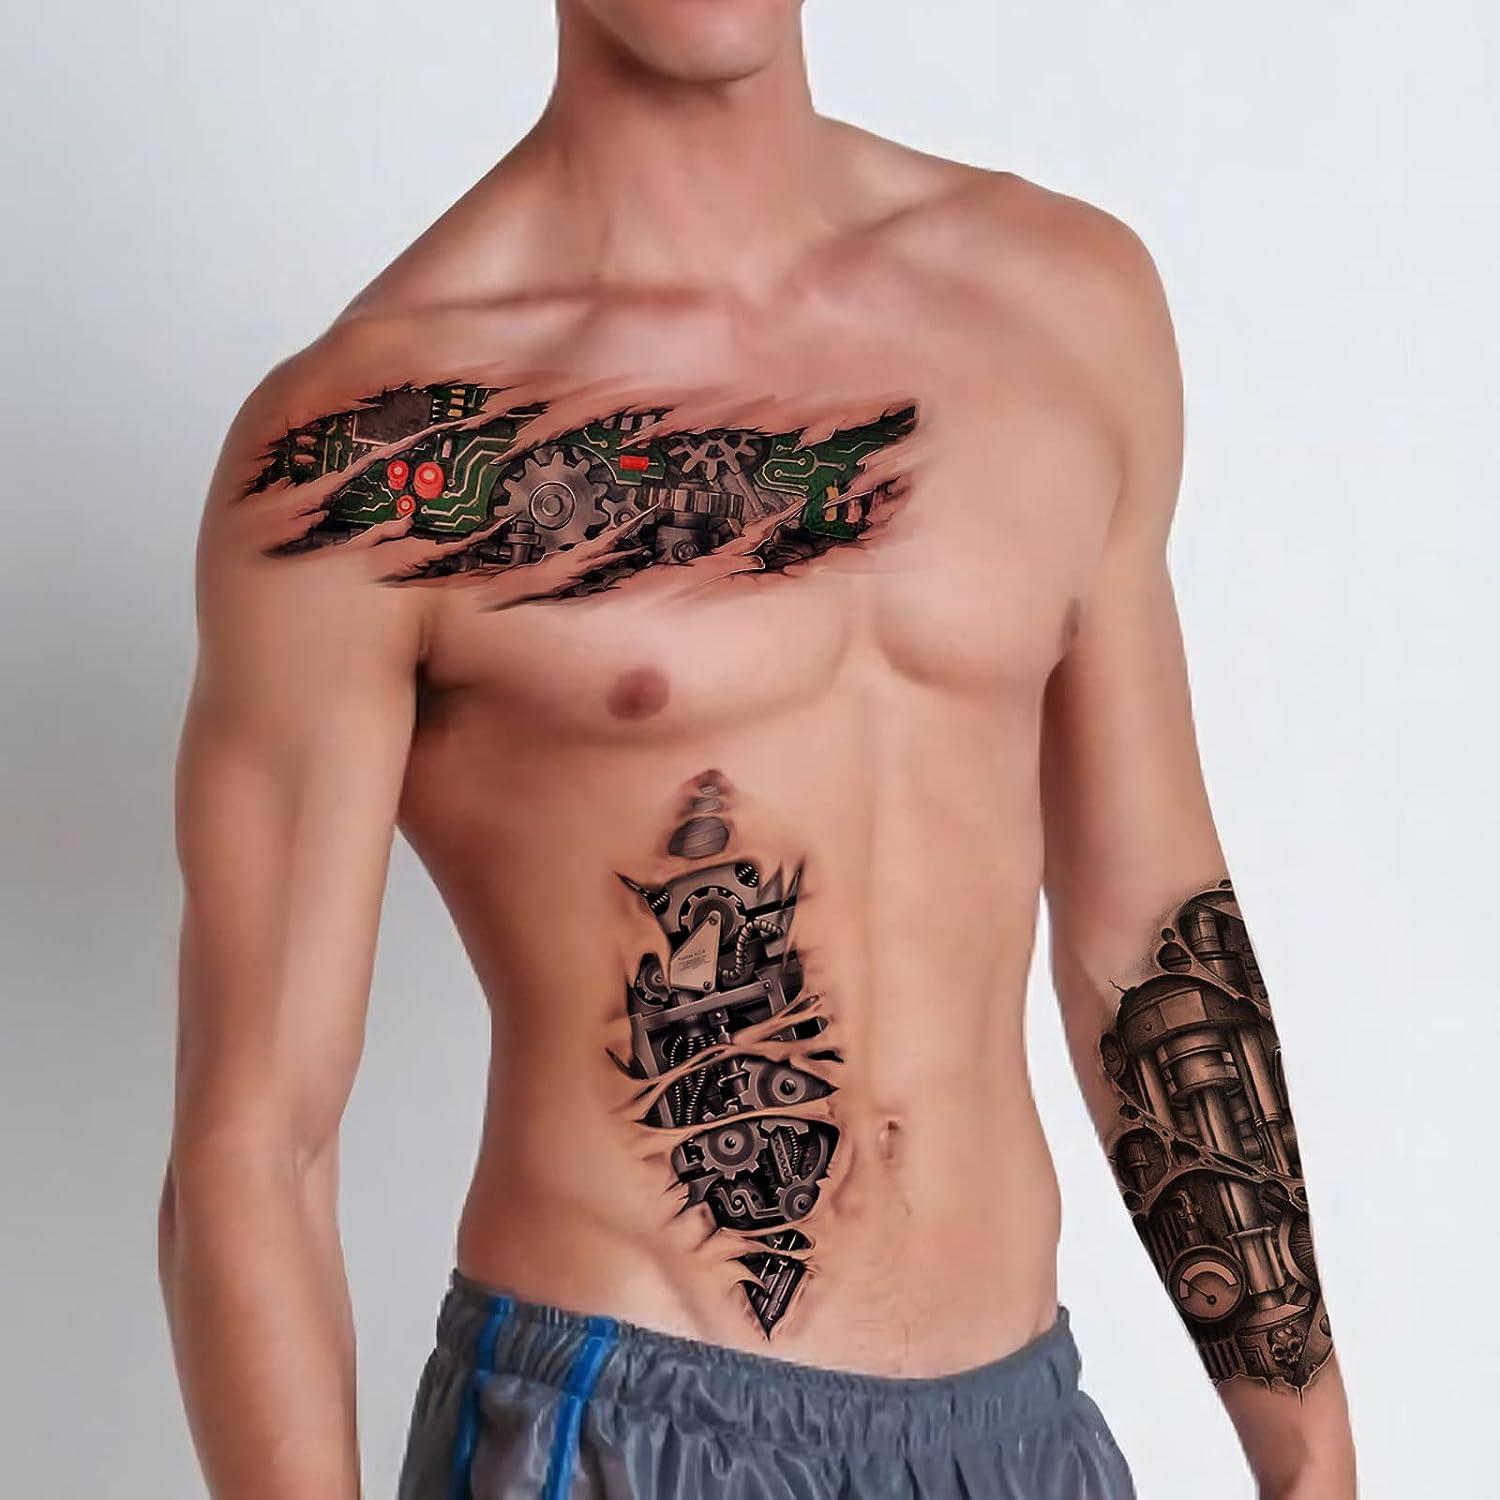 oldguychris:full-frontal-owl-skull-blkgry-rose-book-chest -fineline-stomach-smoke-cool-tattoos-hourglass-bird-of-prey-frontpanel